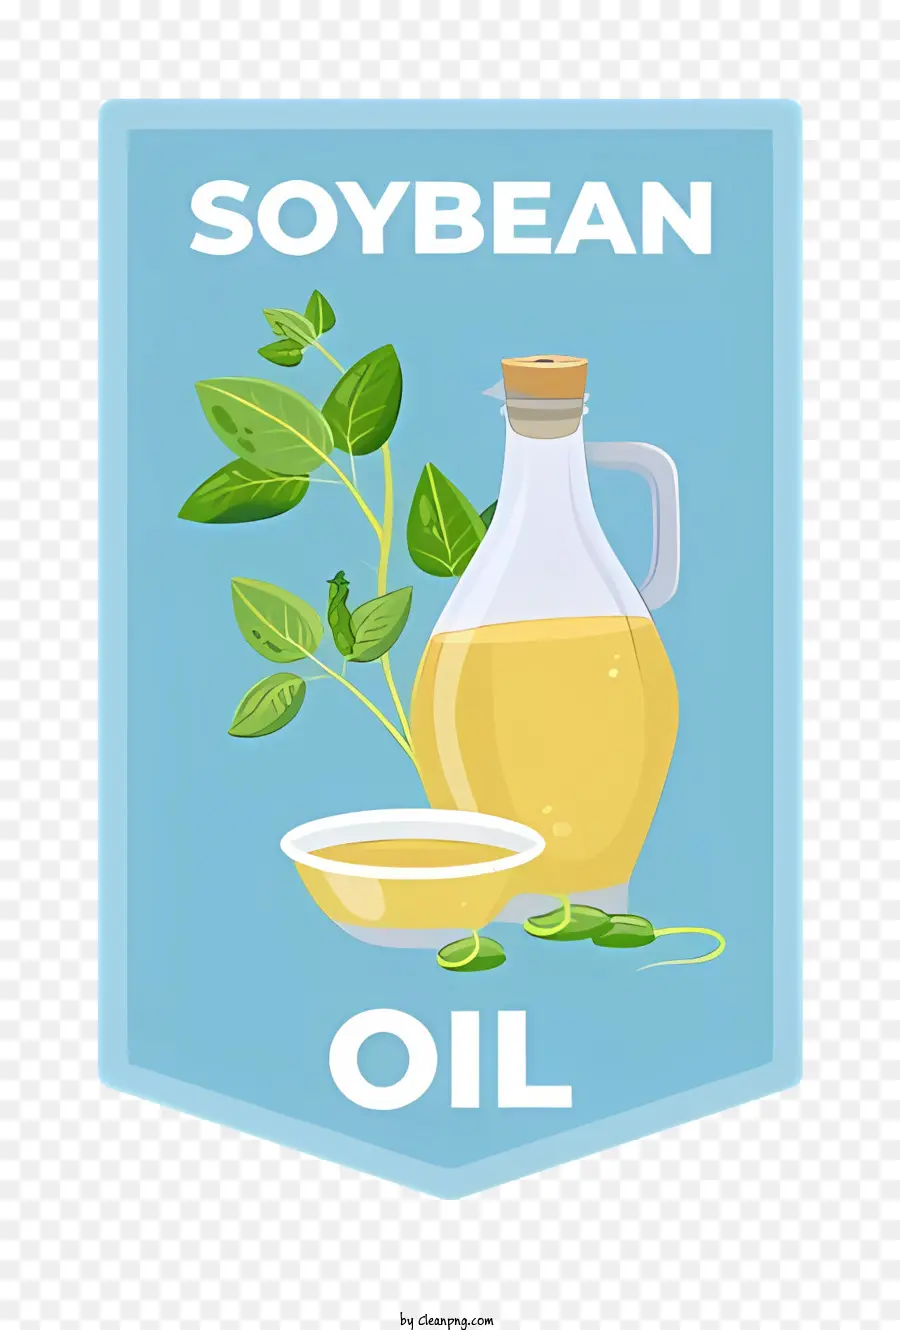 bean day blue background glass container soybean oil green beans